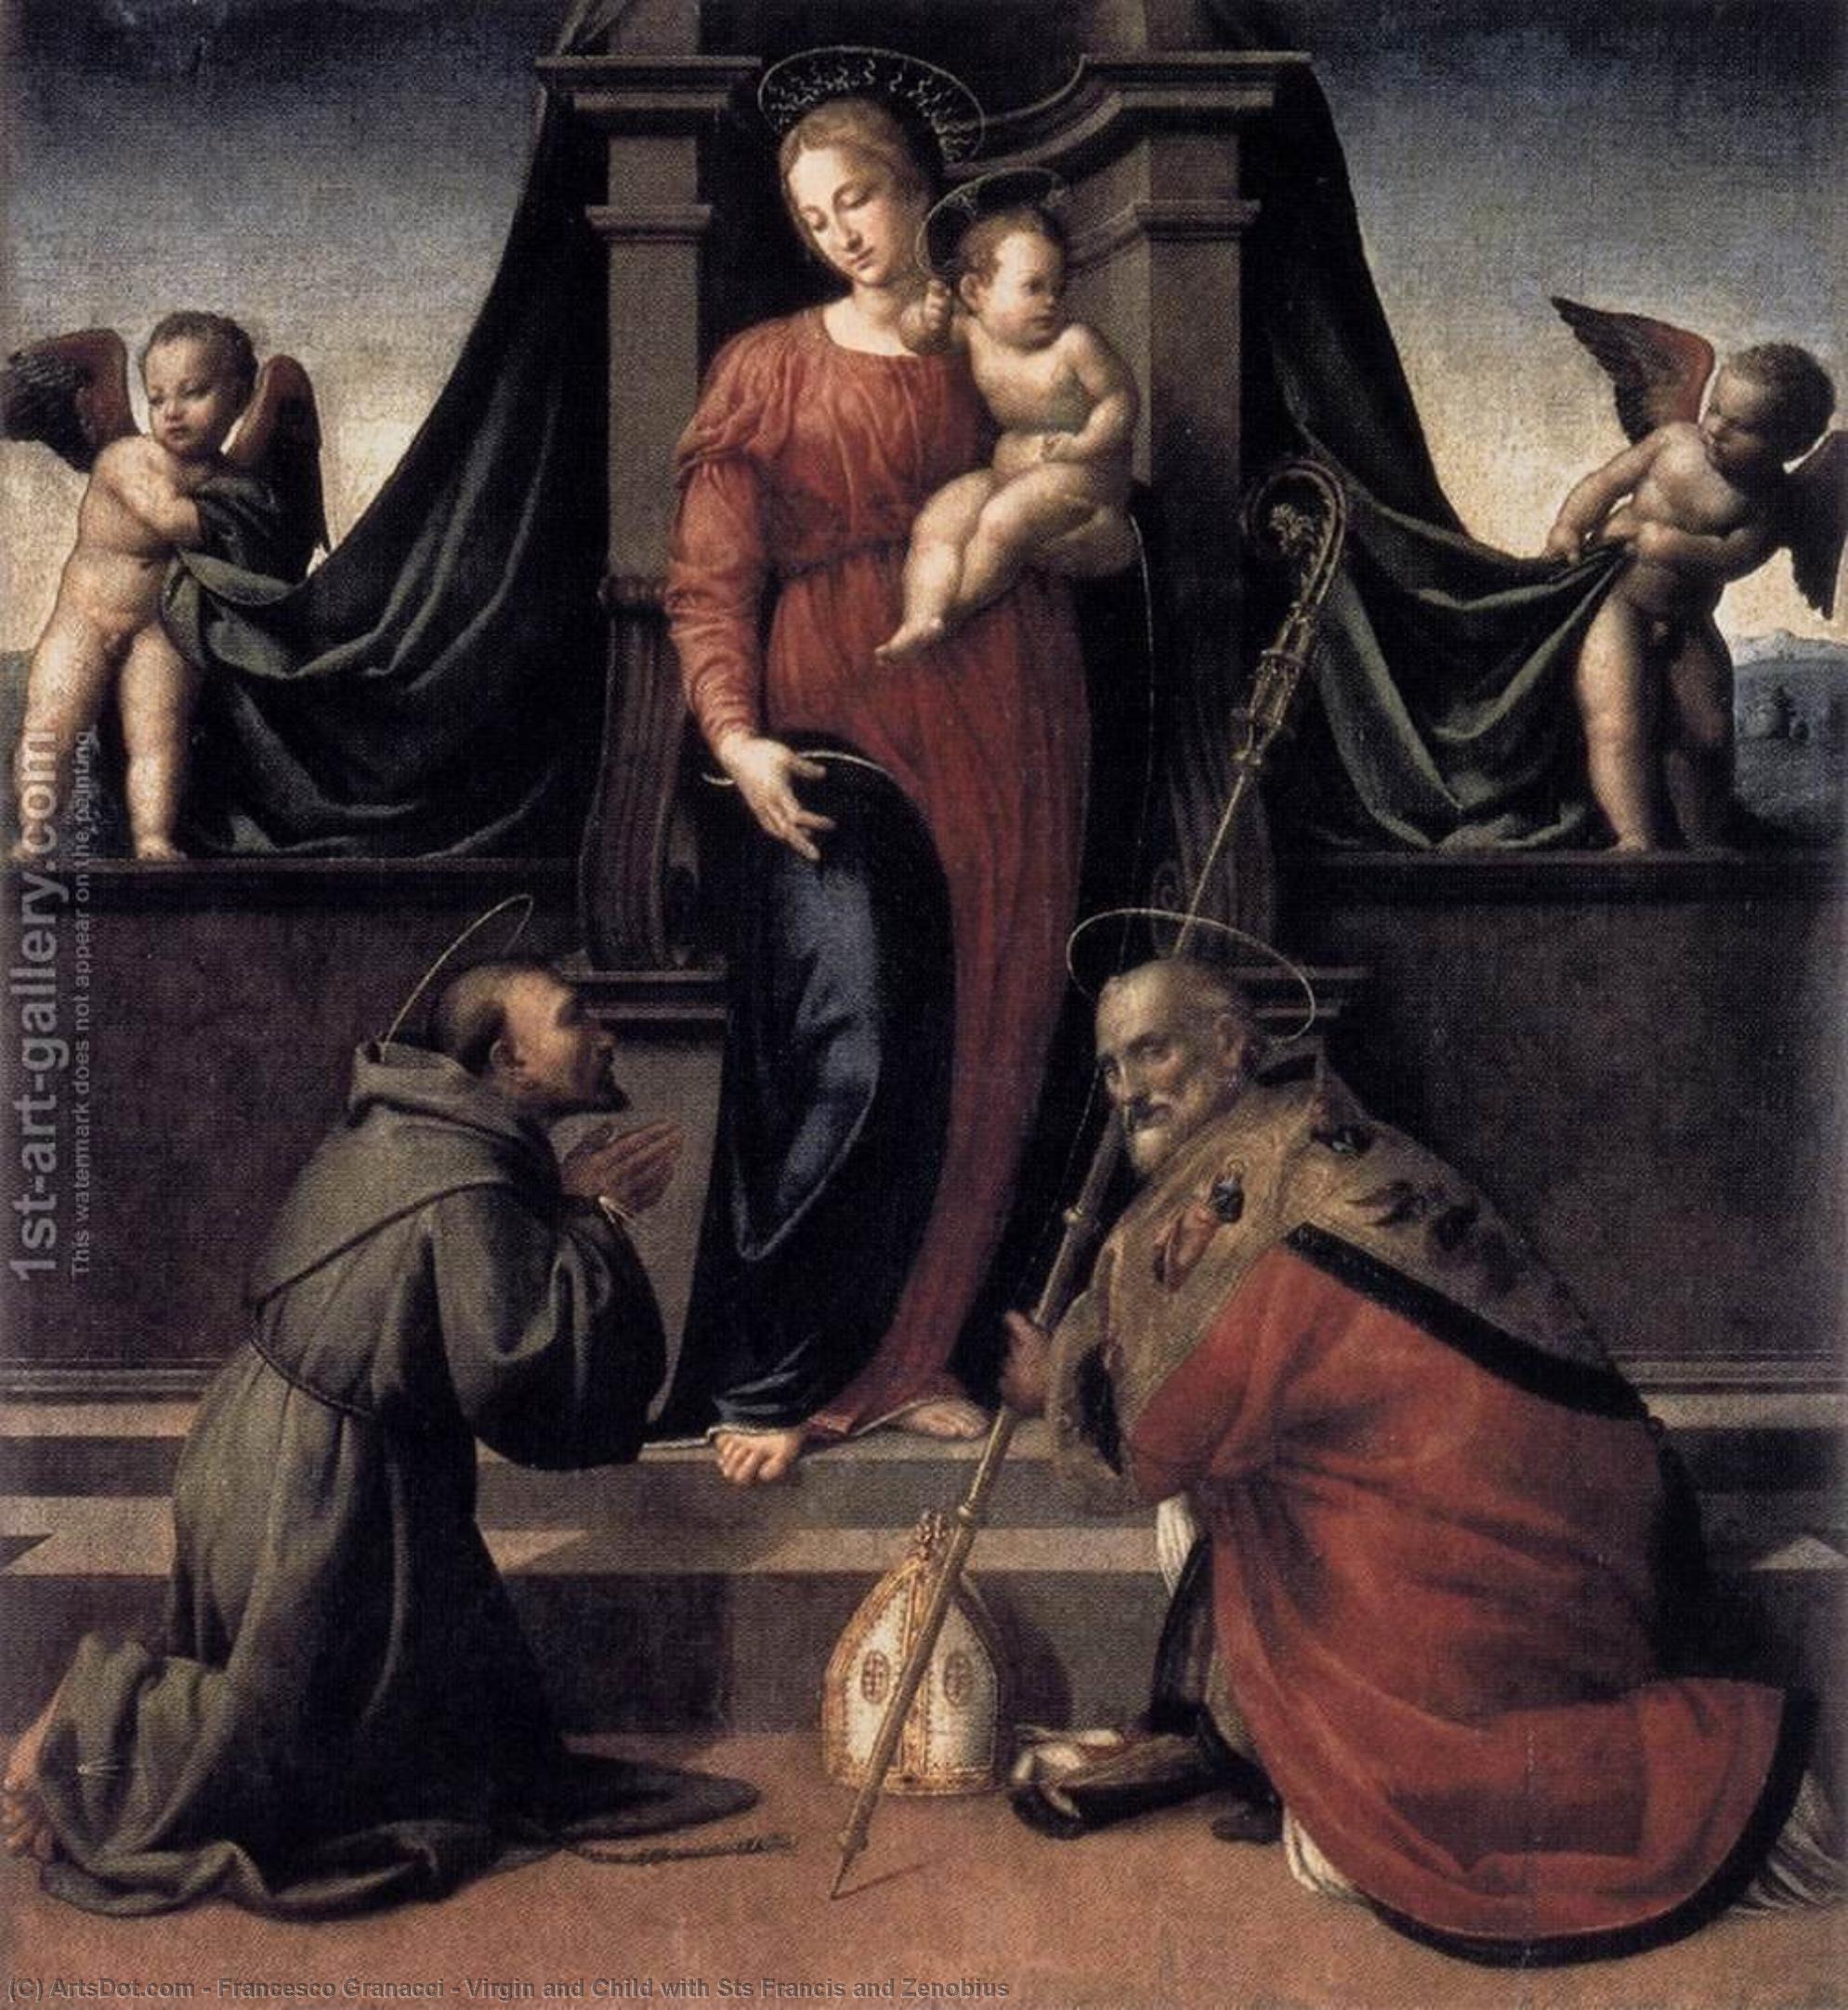 WikiOO.org - Encyclopedia of Fine Arts - Lukisan, Artwork Francesco Granacci - Virgin and Child with Sts Francis and Zenobius